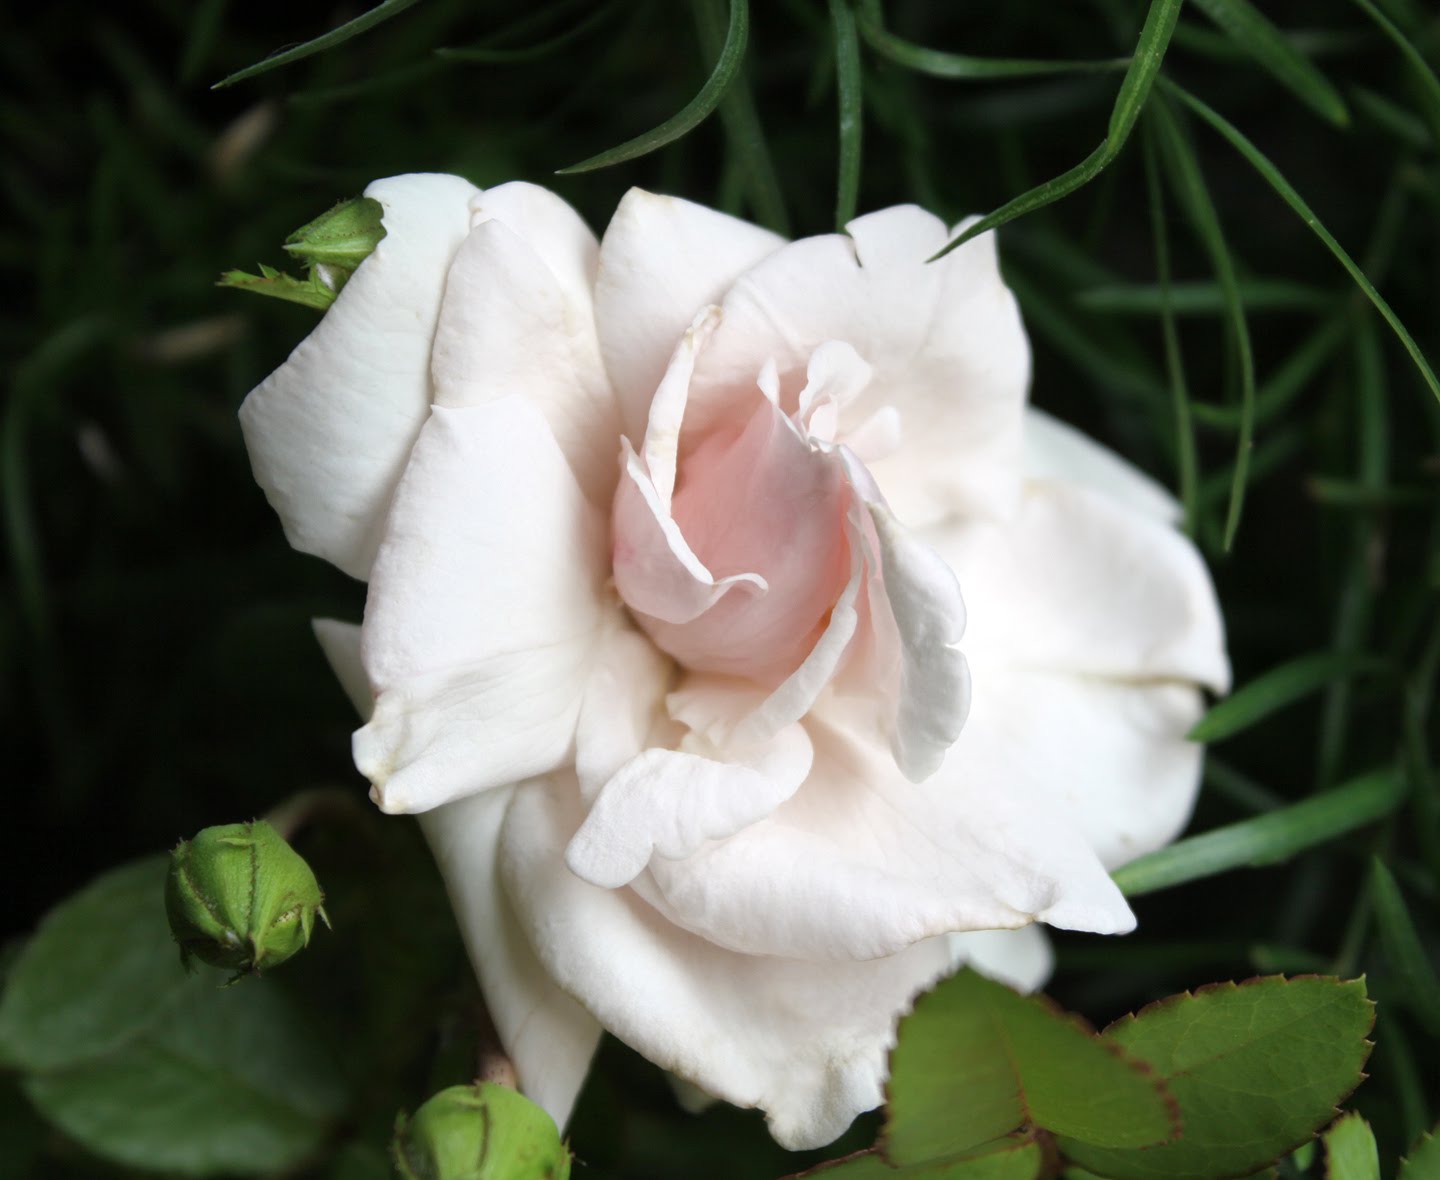 Southern Lagniappe: Why Roses Have Thorns